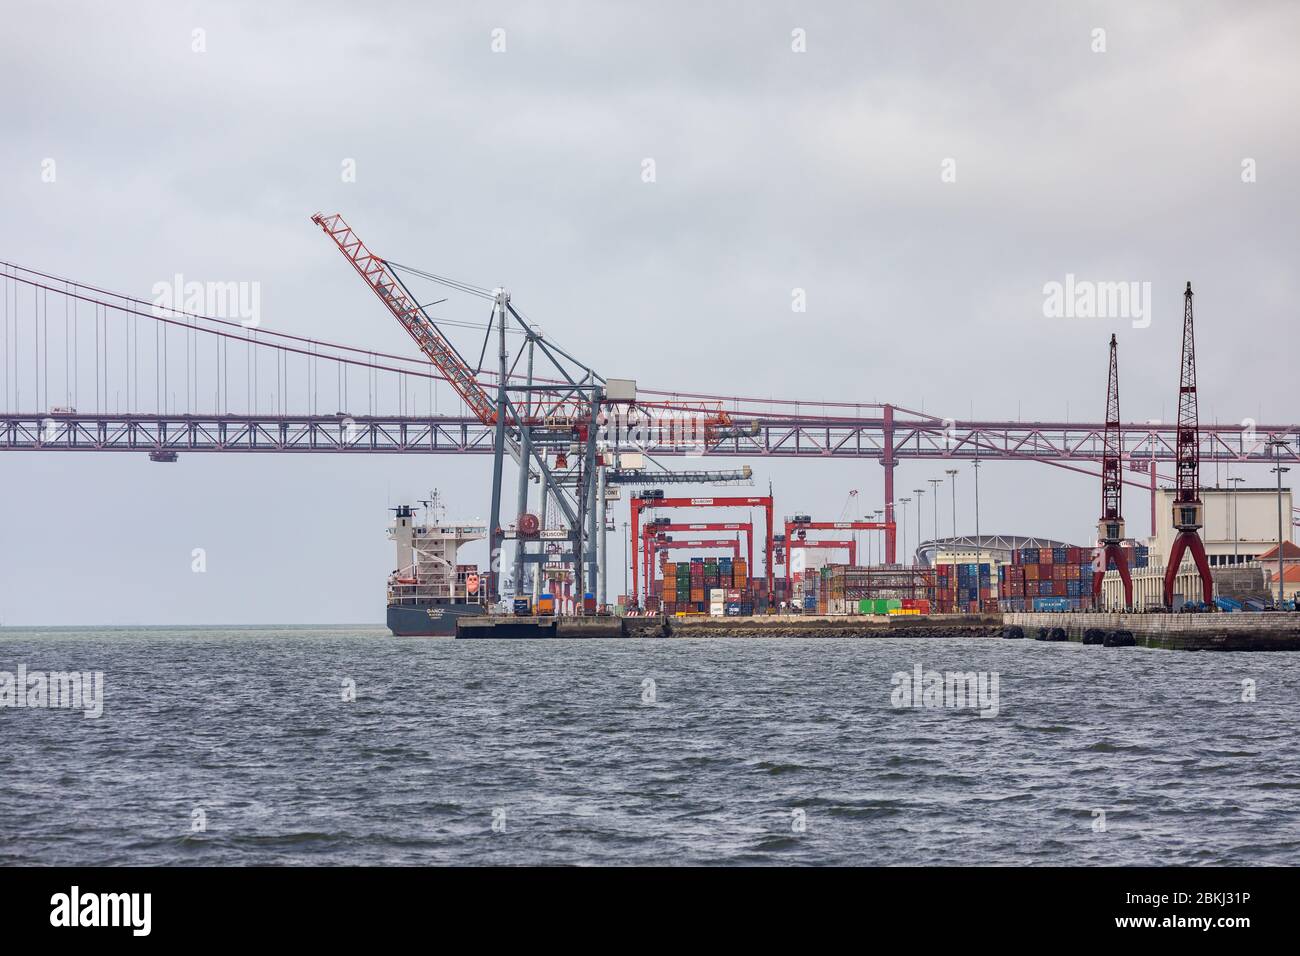 Portugal, Lisbon, the Tagus, from the south bank of the Tagus, loading dock Stock Photo